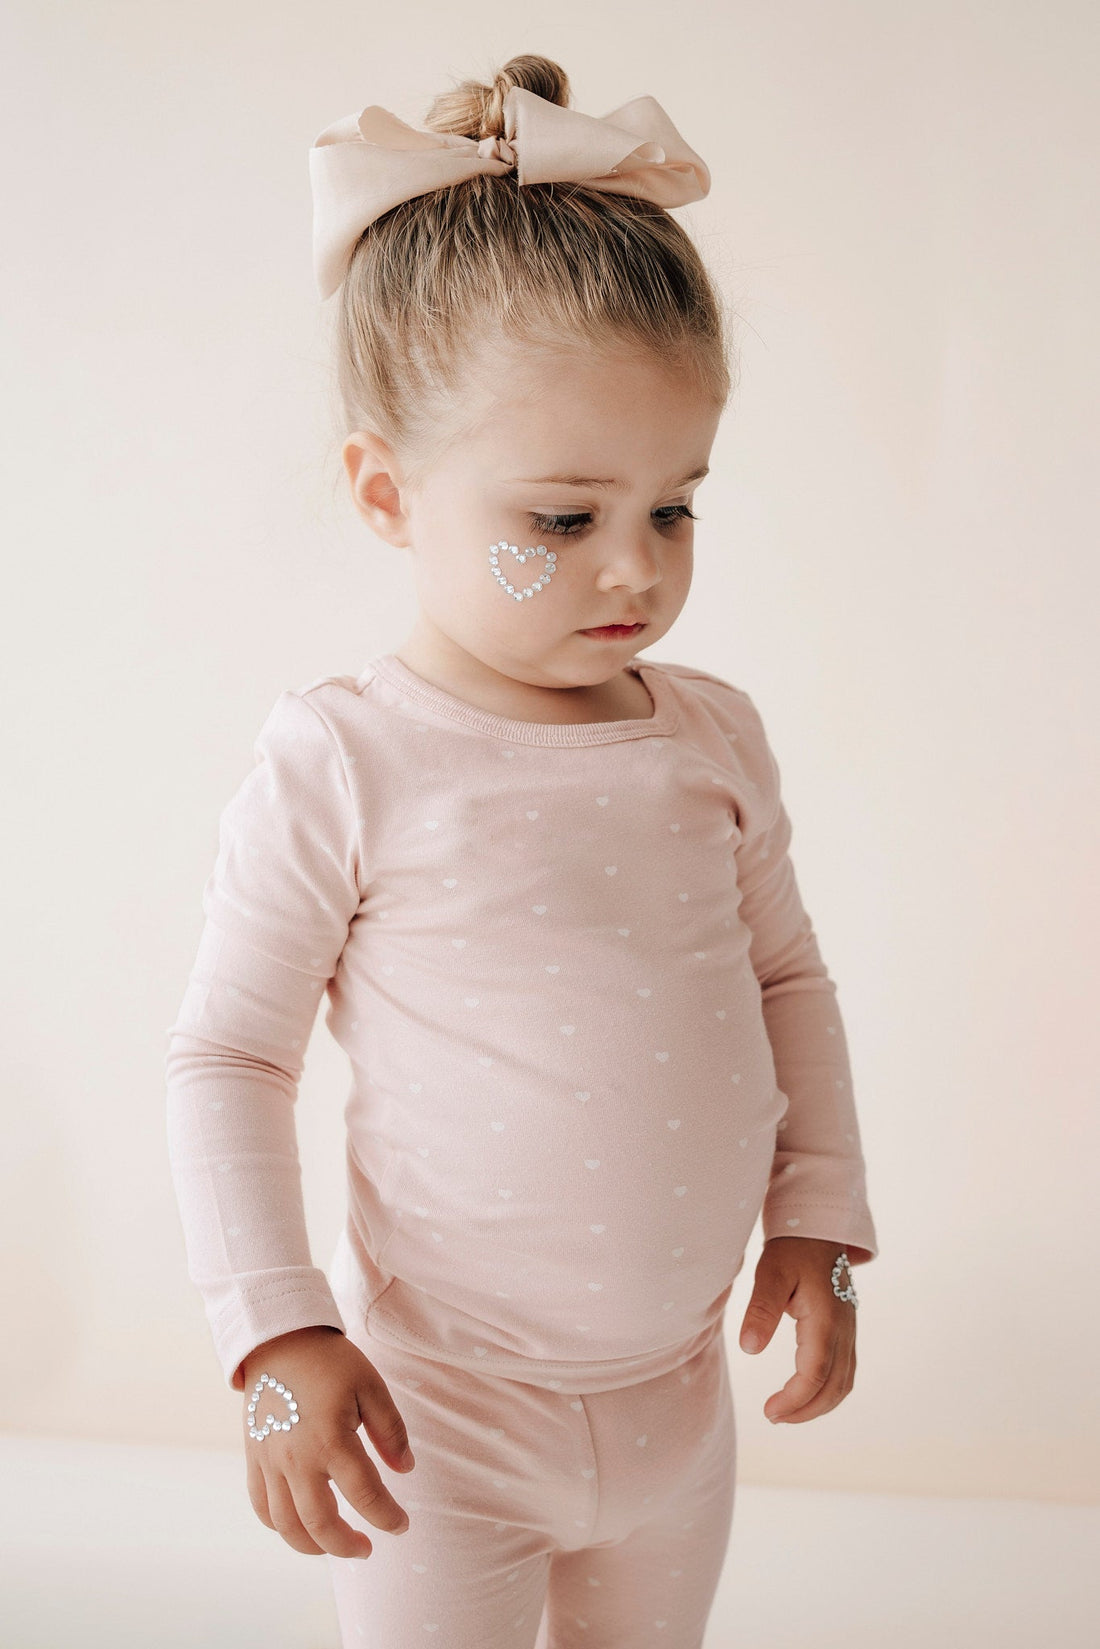 Organic Cotton Bridget Long Sleeve Top - Mon Amour Rose Childrens Top from Jamie Kay USA